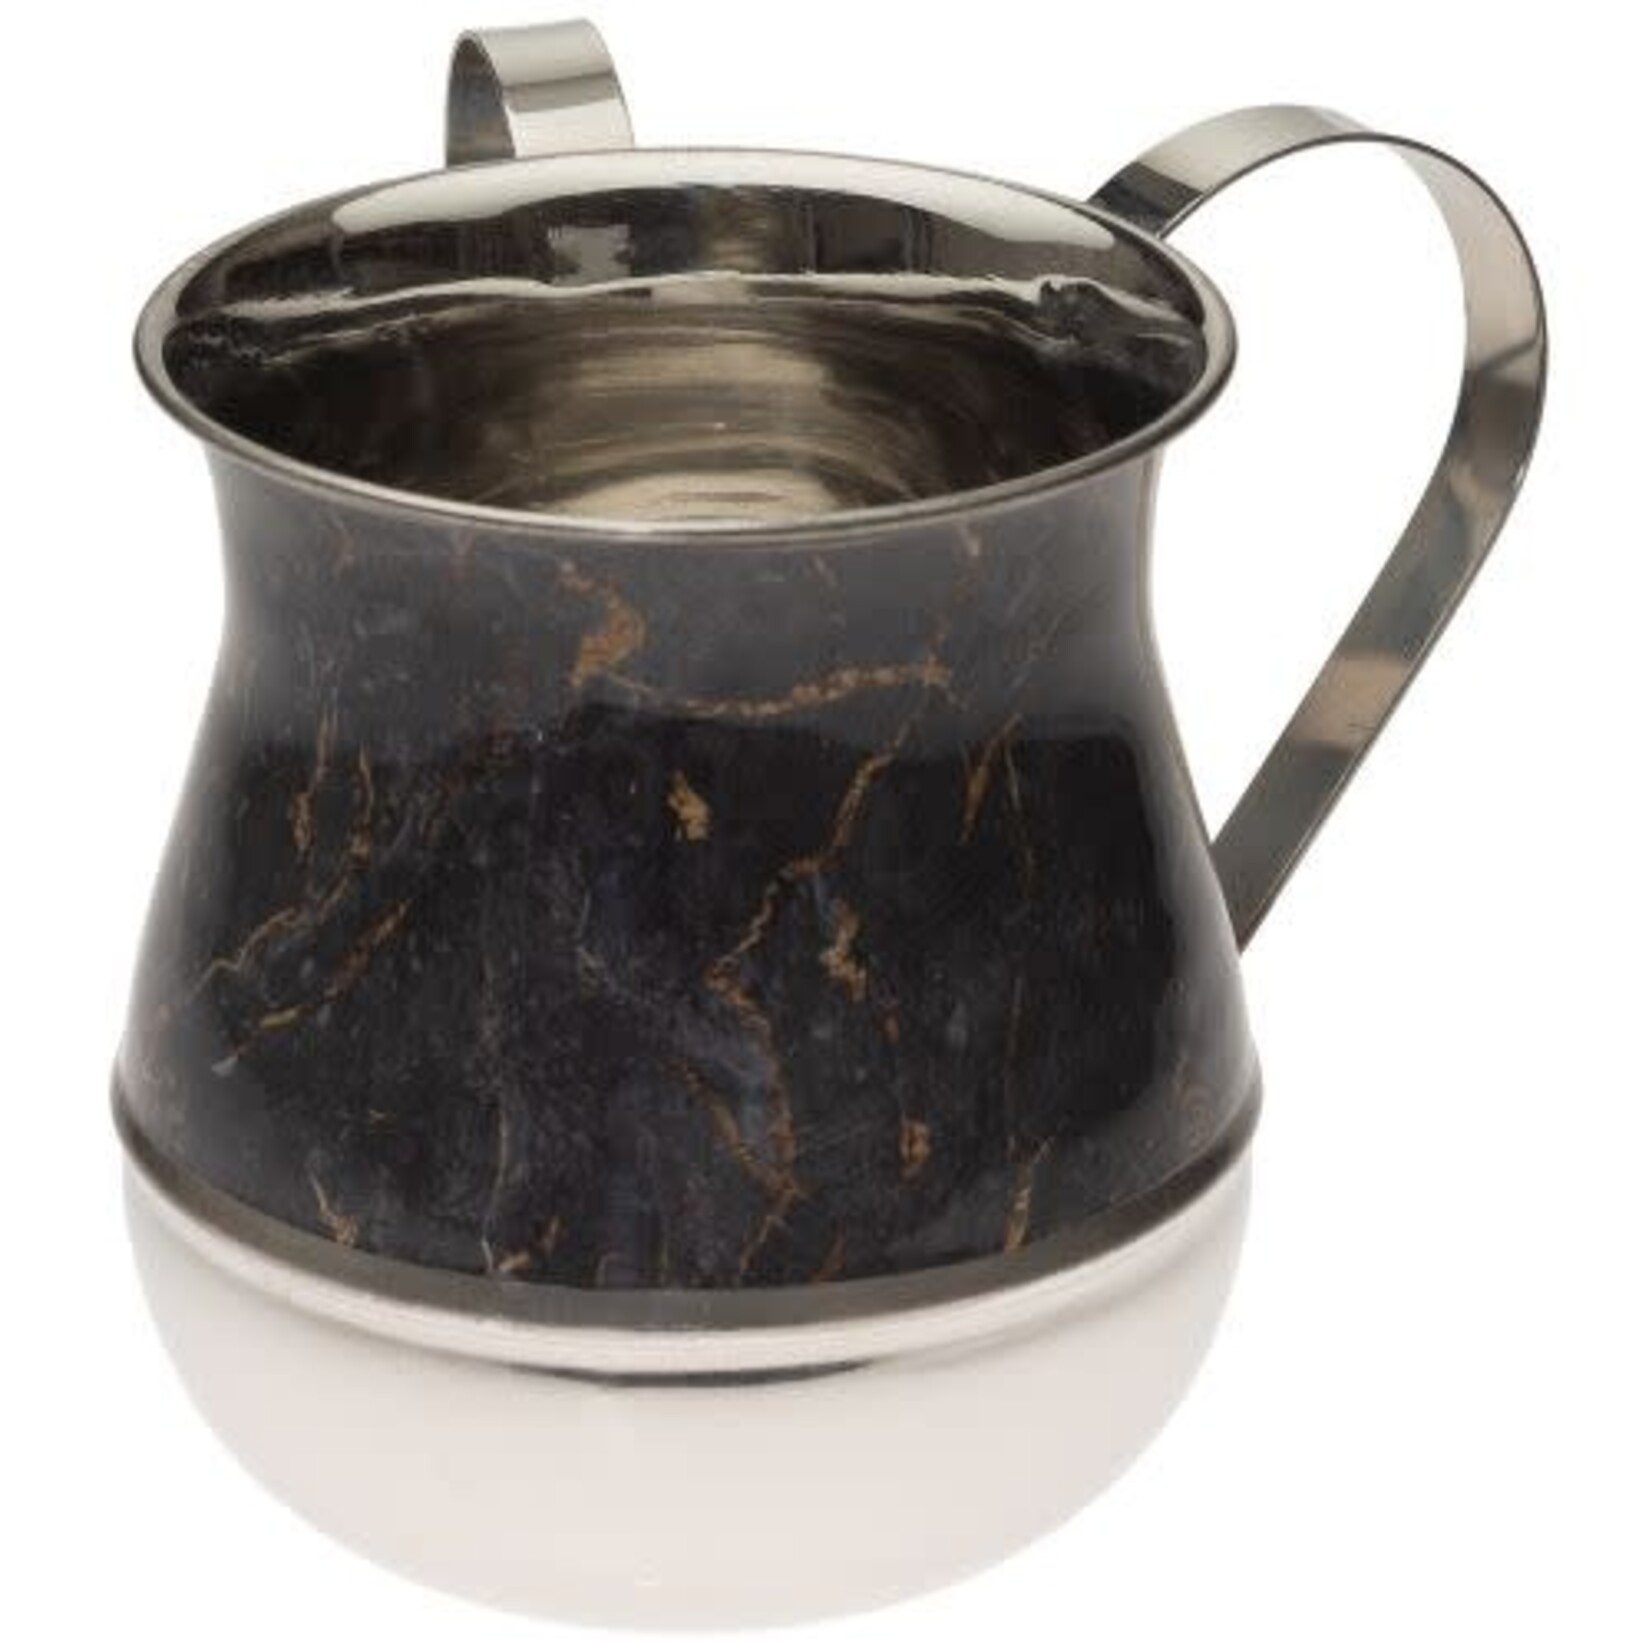 Stainless Steel Wash Cup - Black Marble